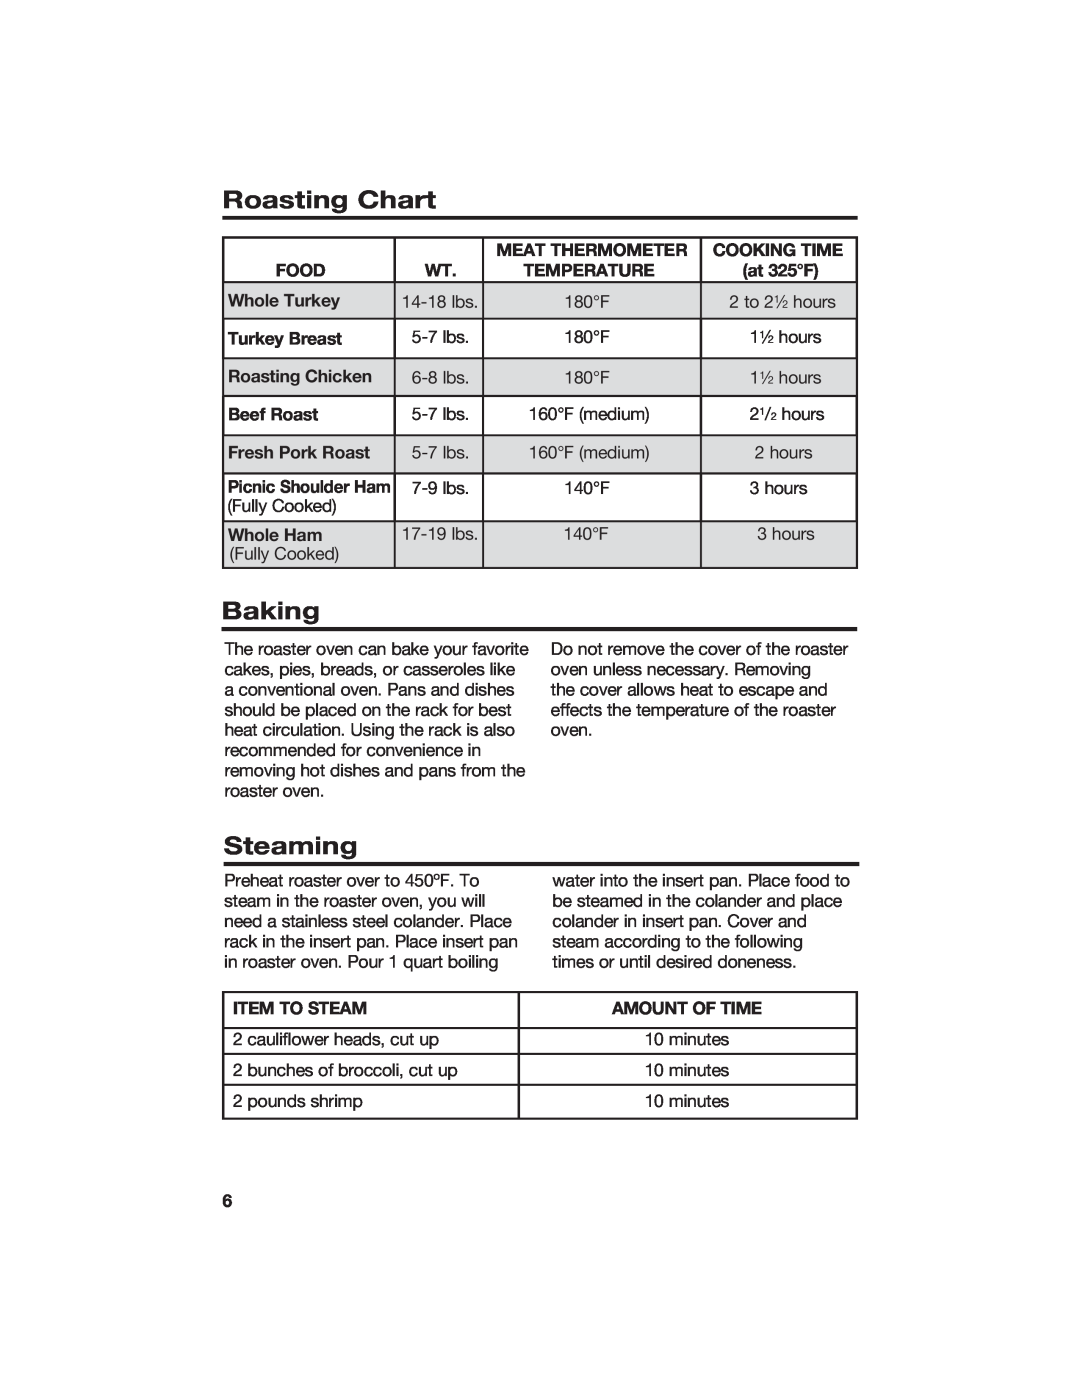 Hamilton Beach Roaster Oven Roasting Chart, Baking, Steaming, Meat Thermometer, Cooking Time, Food, Temperature, at 325F 